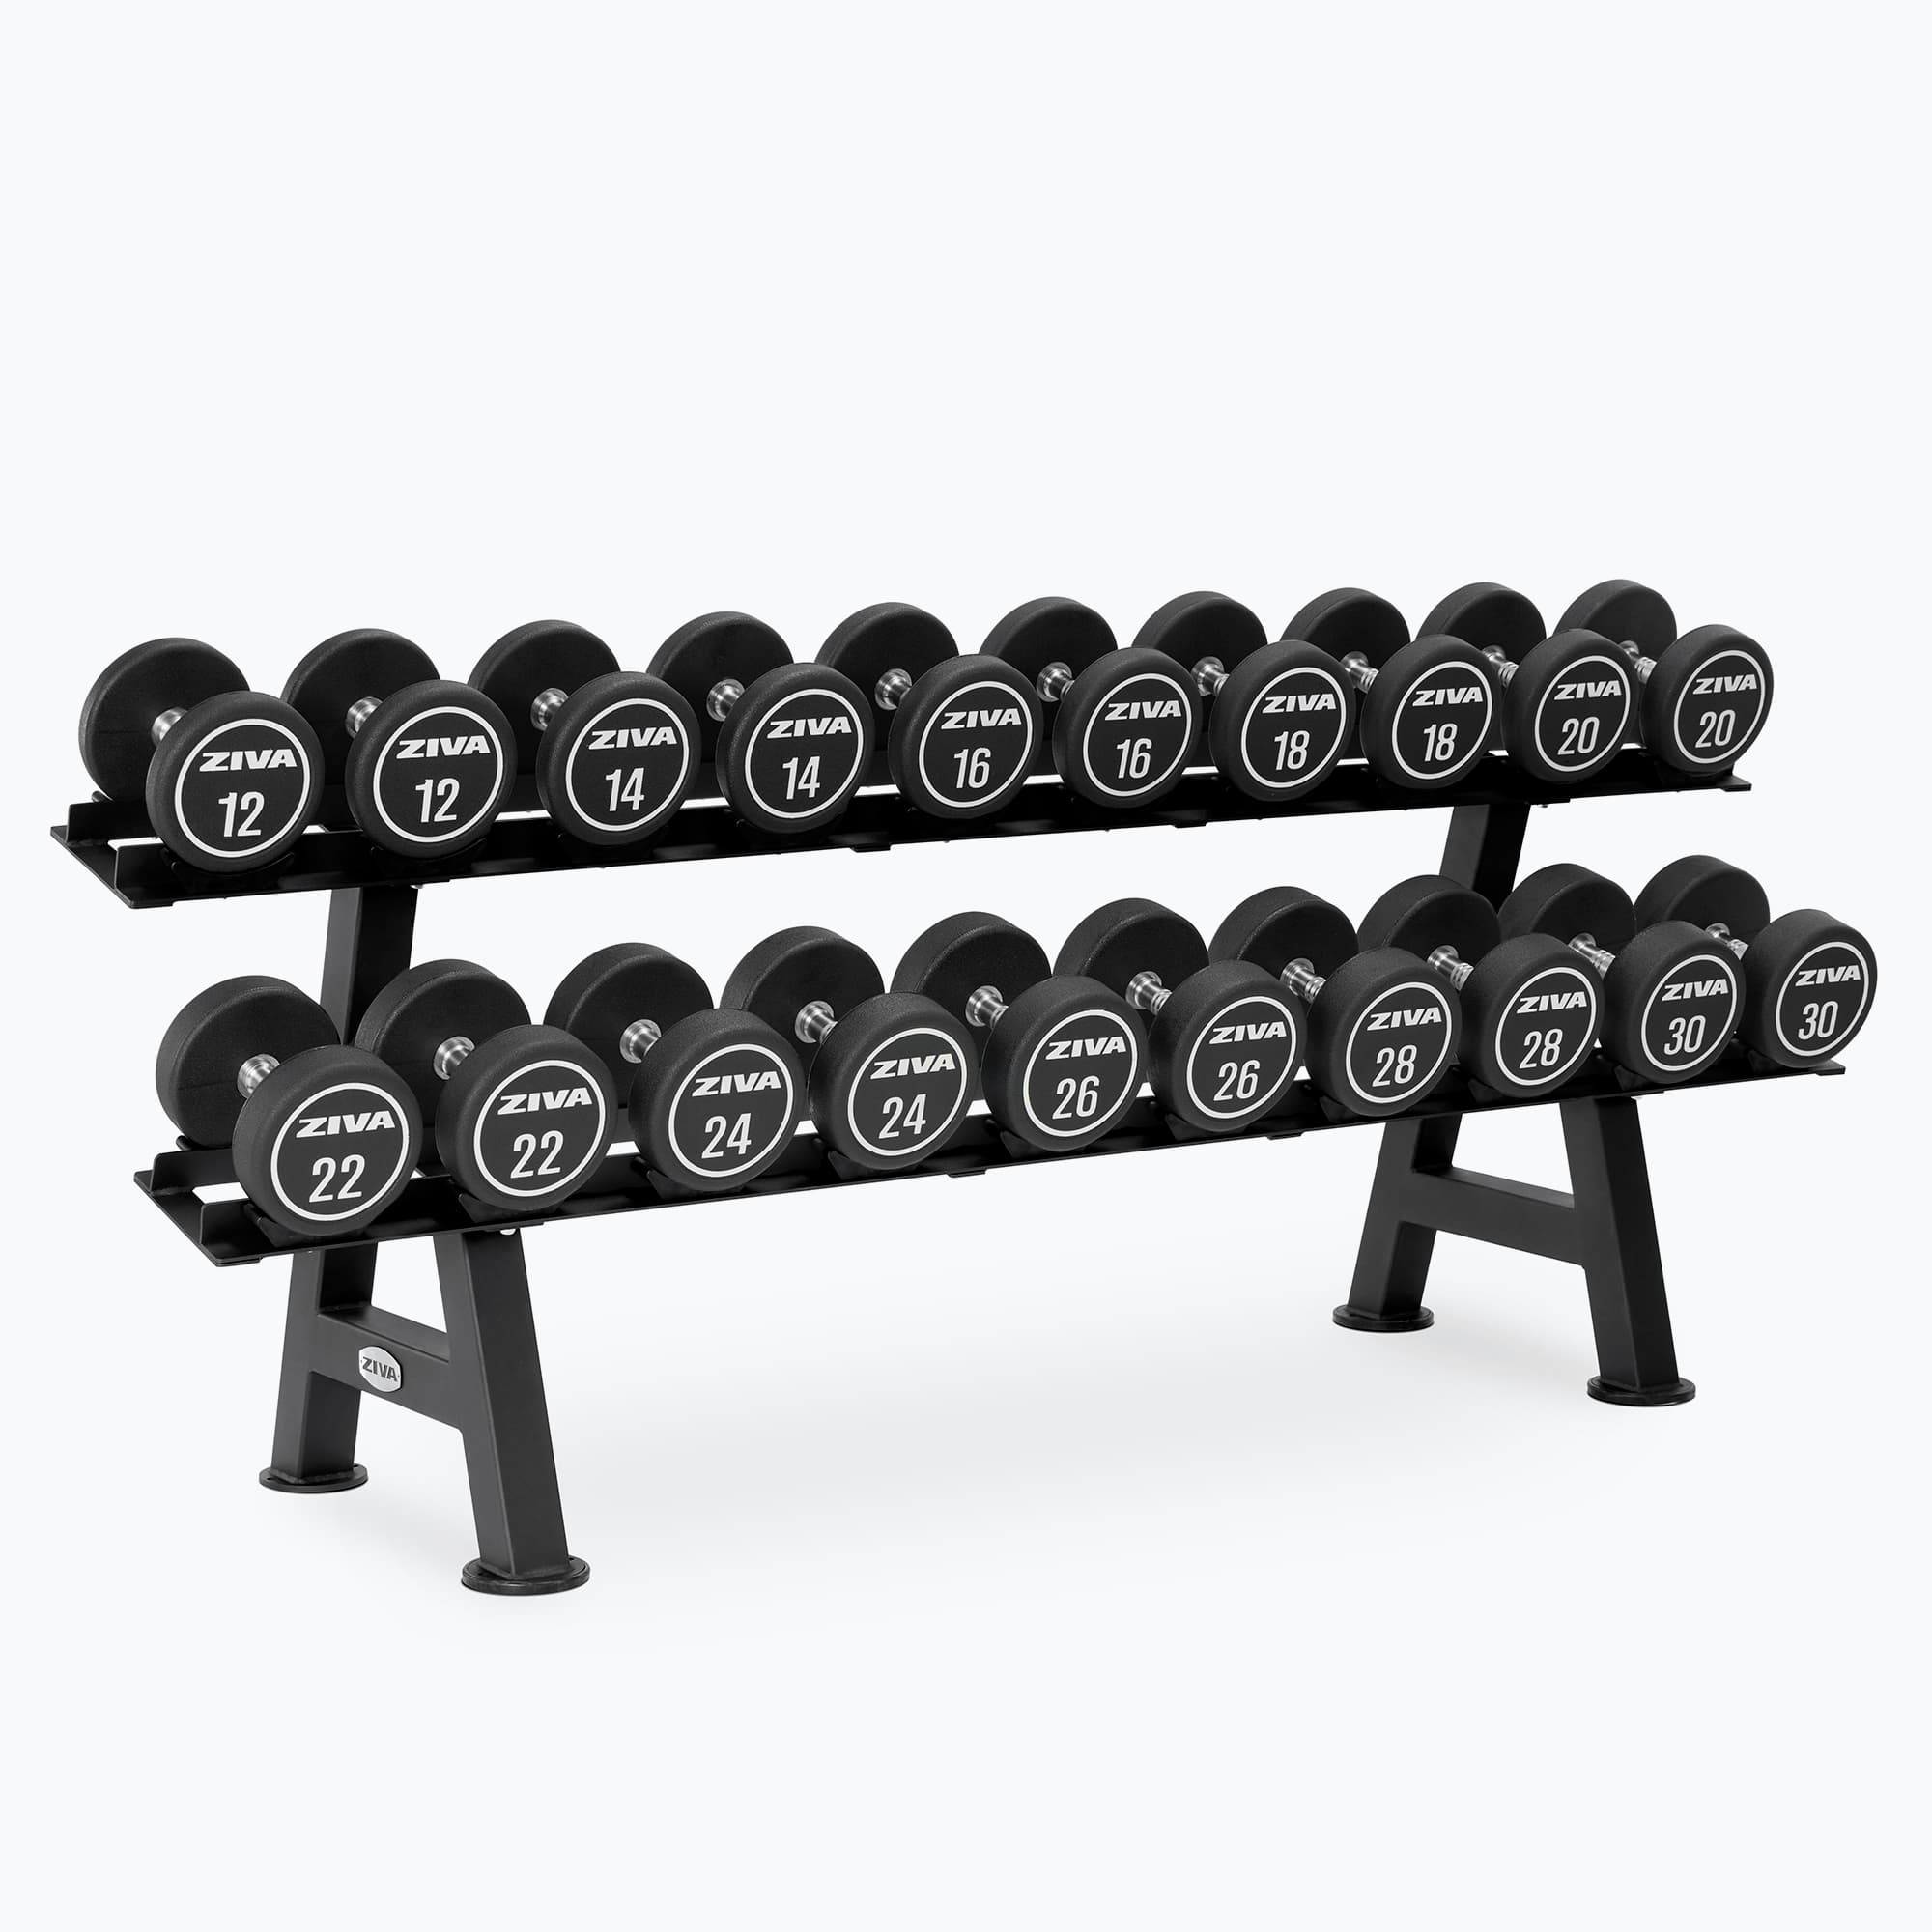 XP 10 PAIR DUMBBELL RACK WITH SADDLES